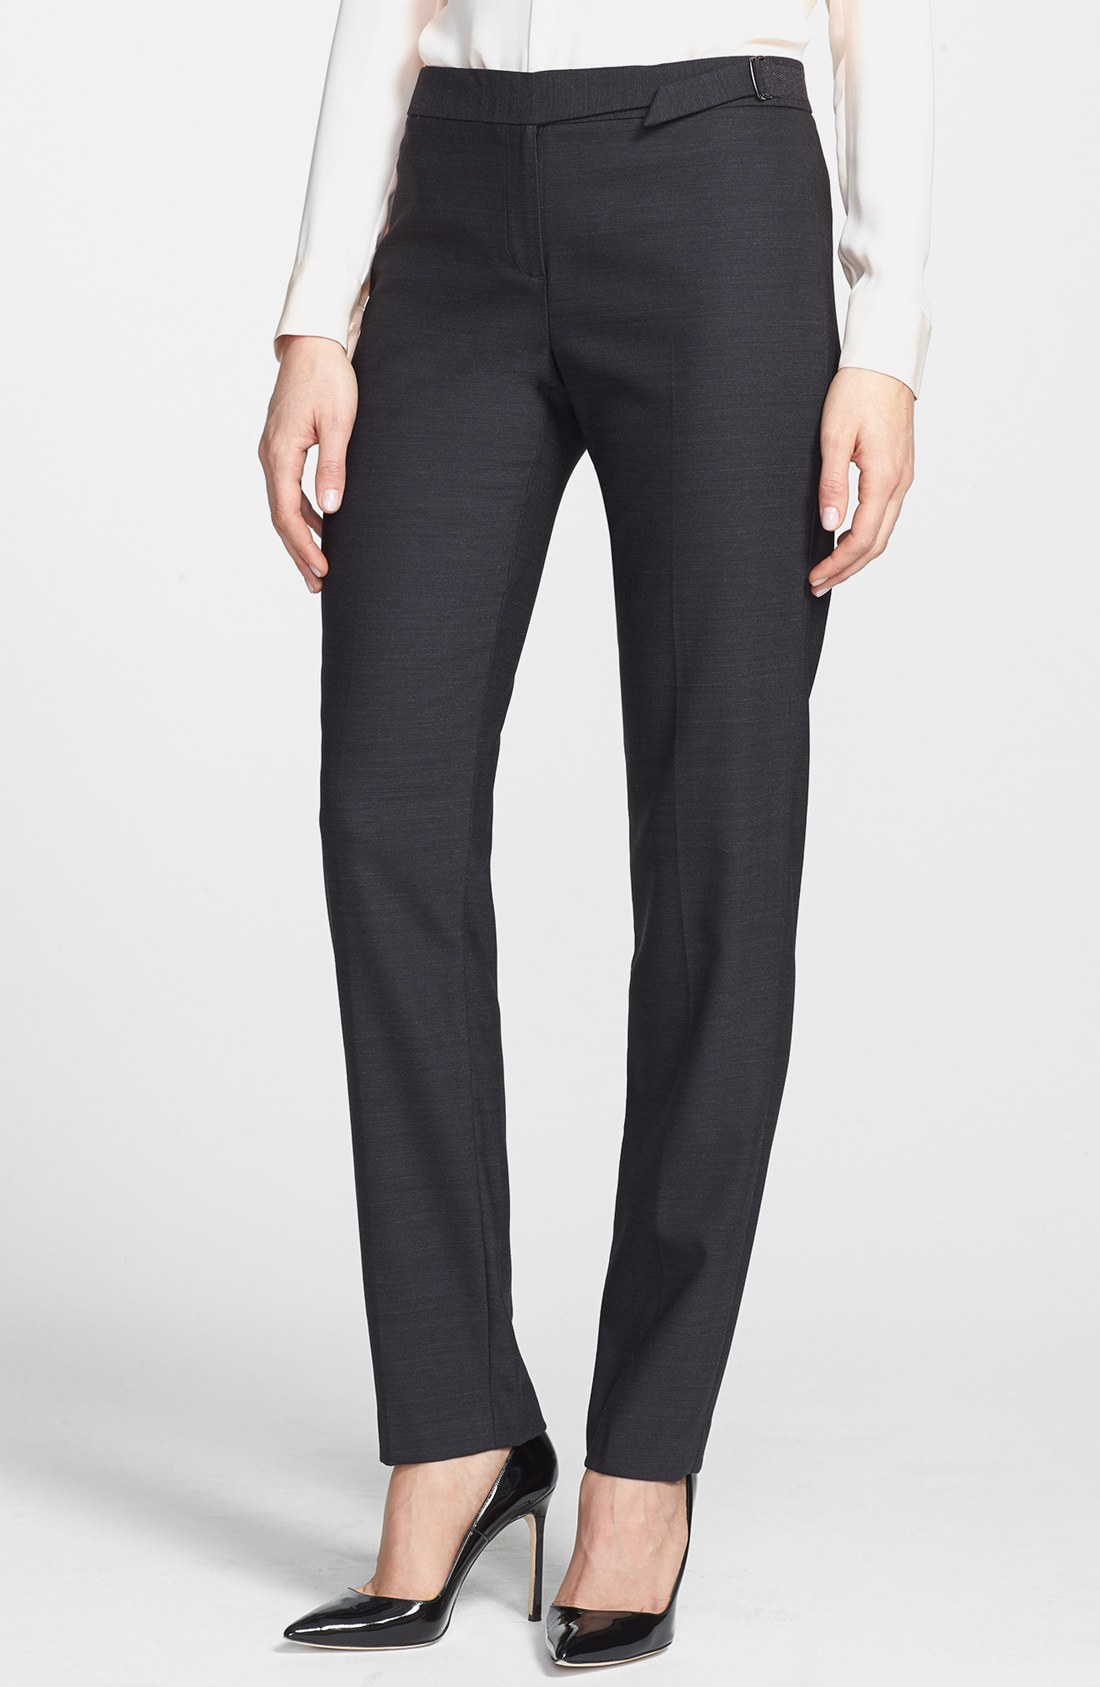 Theory Nov Straight Leg Wool Ankle Pants in Gray (Dark Charcoal)